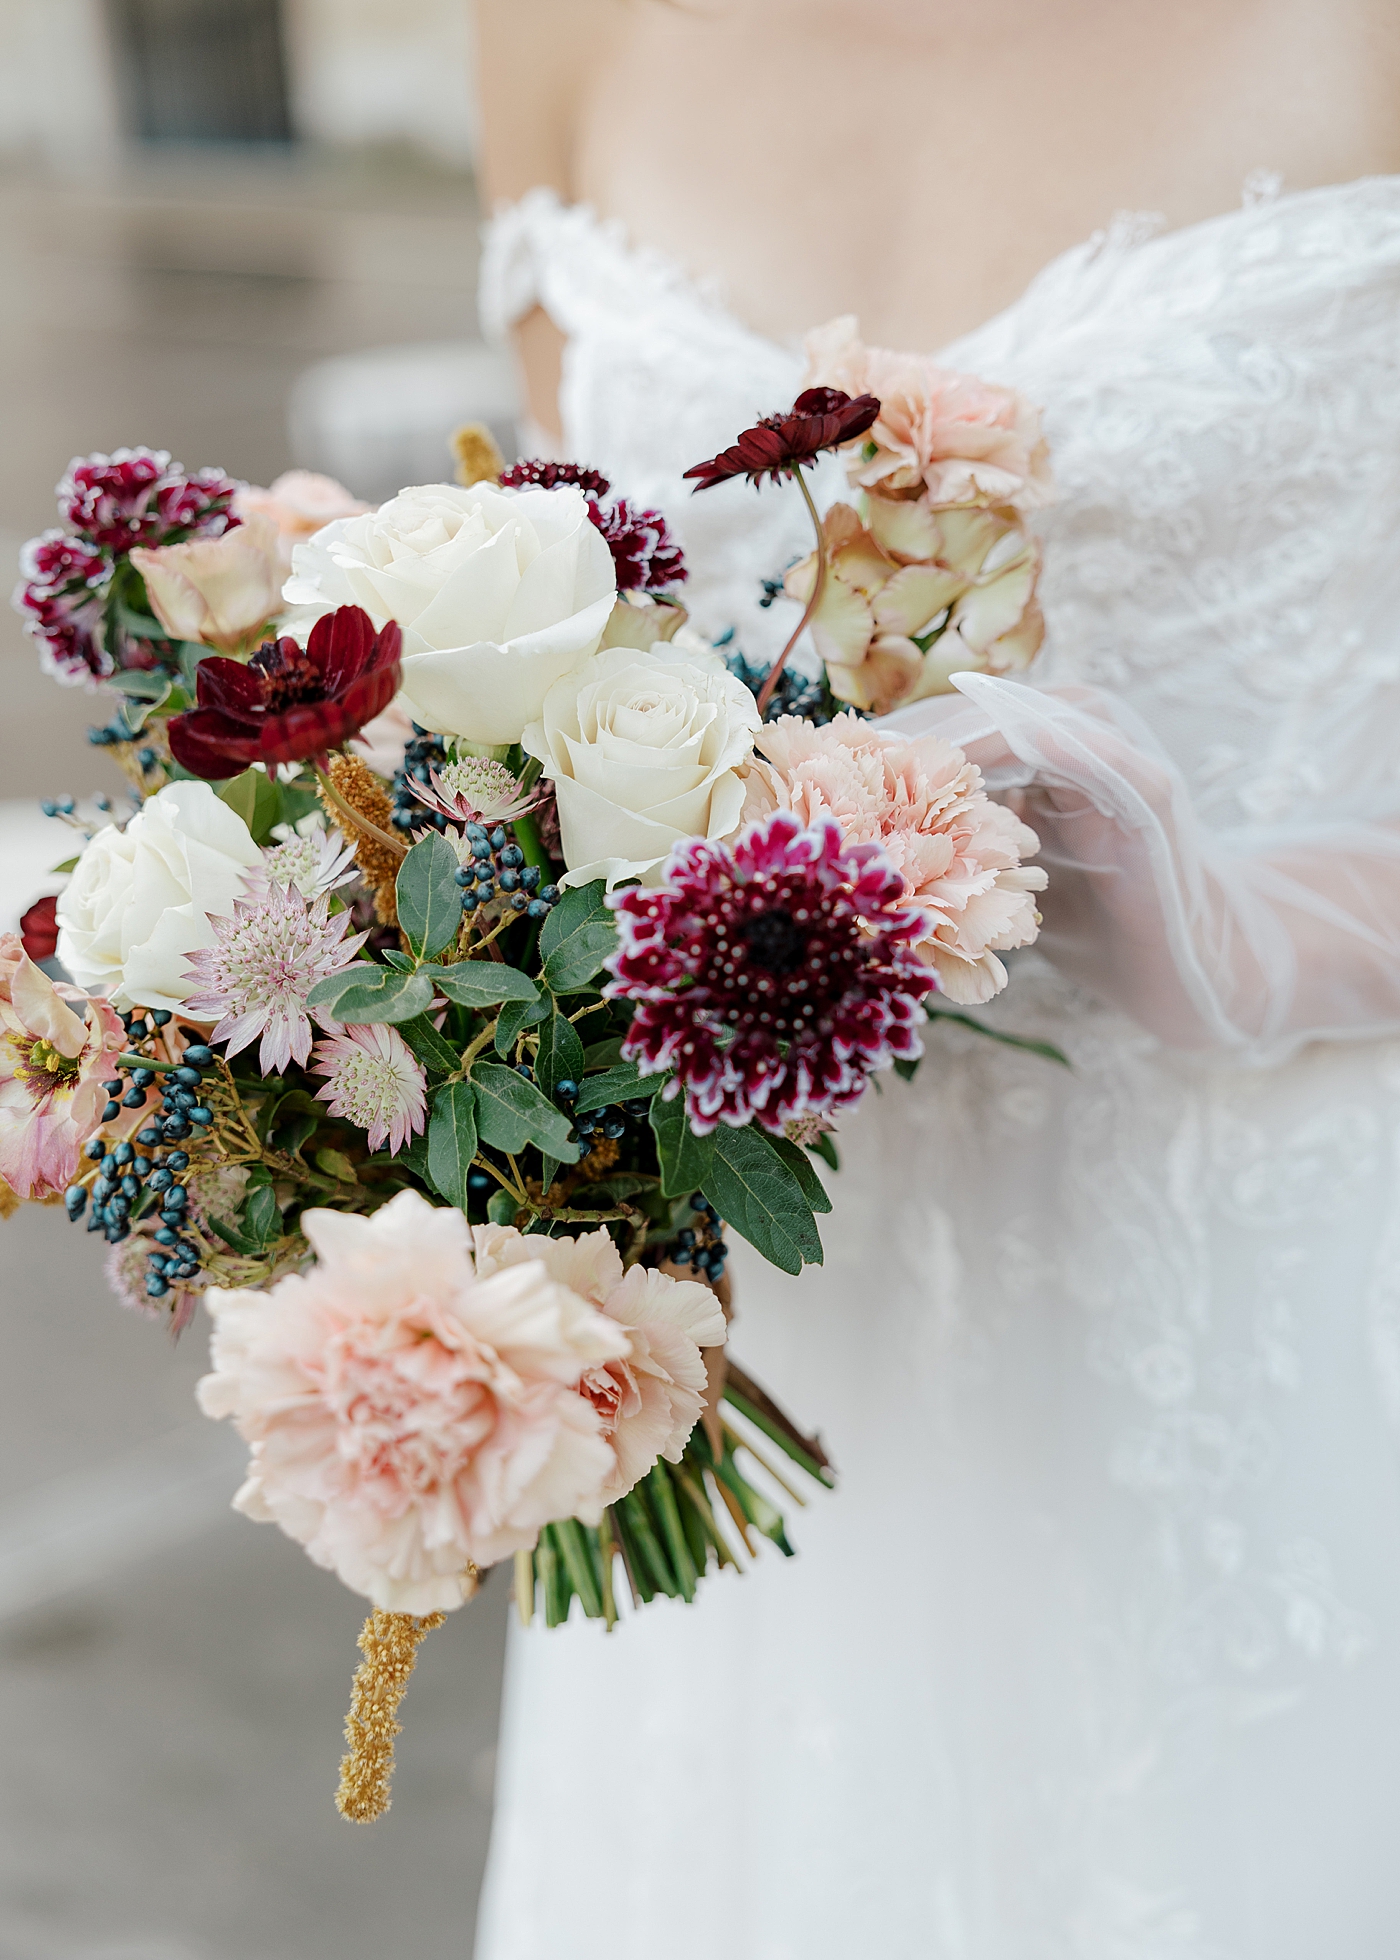 Detail of a bride holding a bridal bouquet with muted burgundy, navy, and cream colors | Image by Hope Helmuth Photography